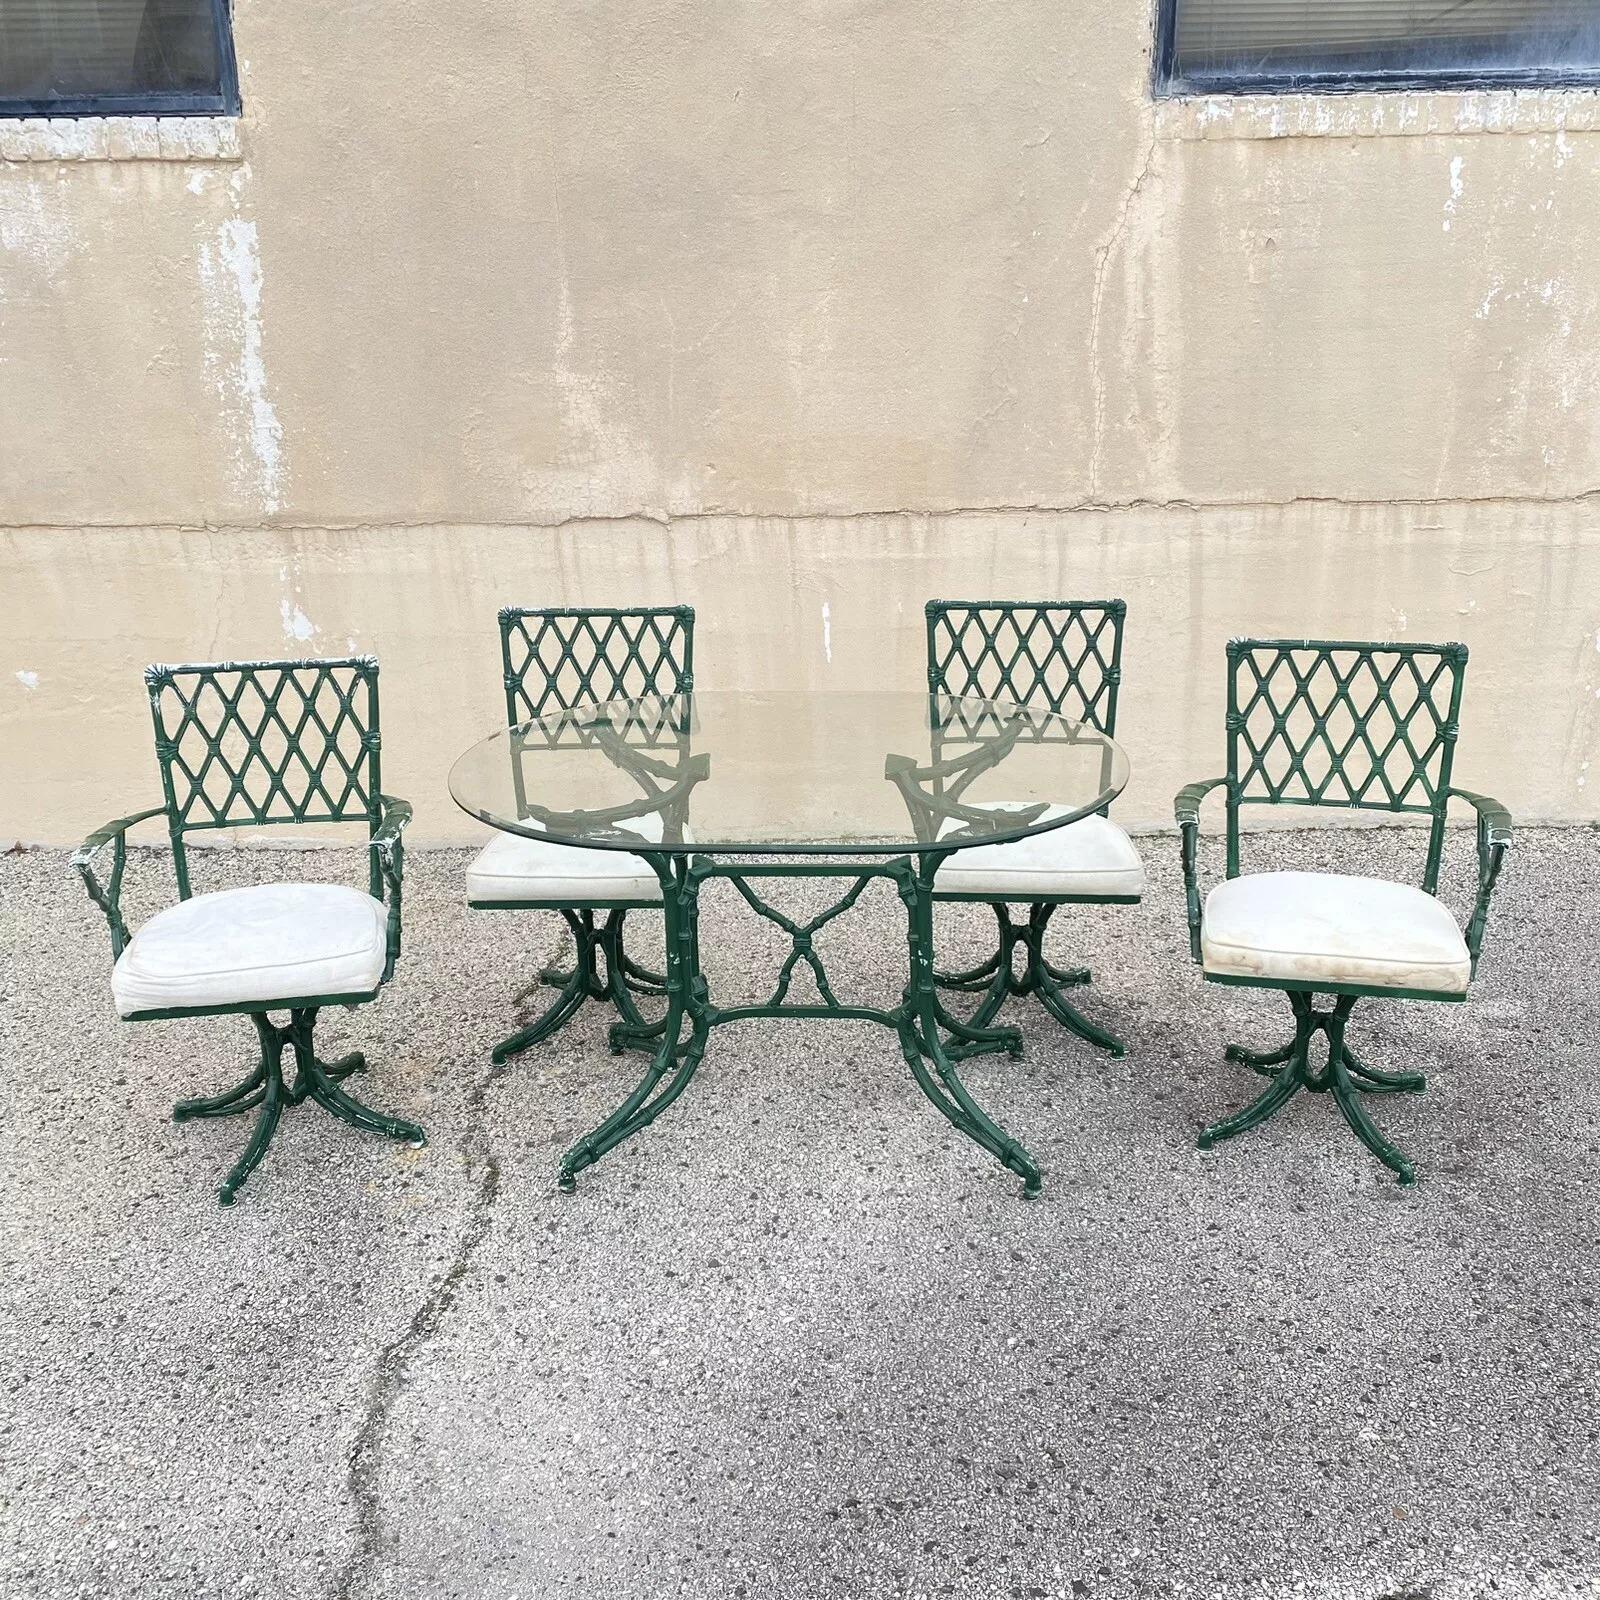 Vintage Hollywood Regency Faux Bamboo Lattice Metal Green Dining Set - 5 Pc Set. Item features (2) Armchairs, (2) armless chairs, pedestal base dining table, oval clear glass top, swivel pedestal base chairs, very nice vintage set. Circa Mid 20th